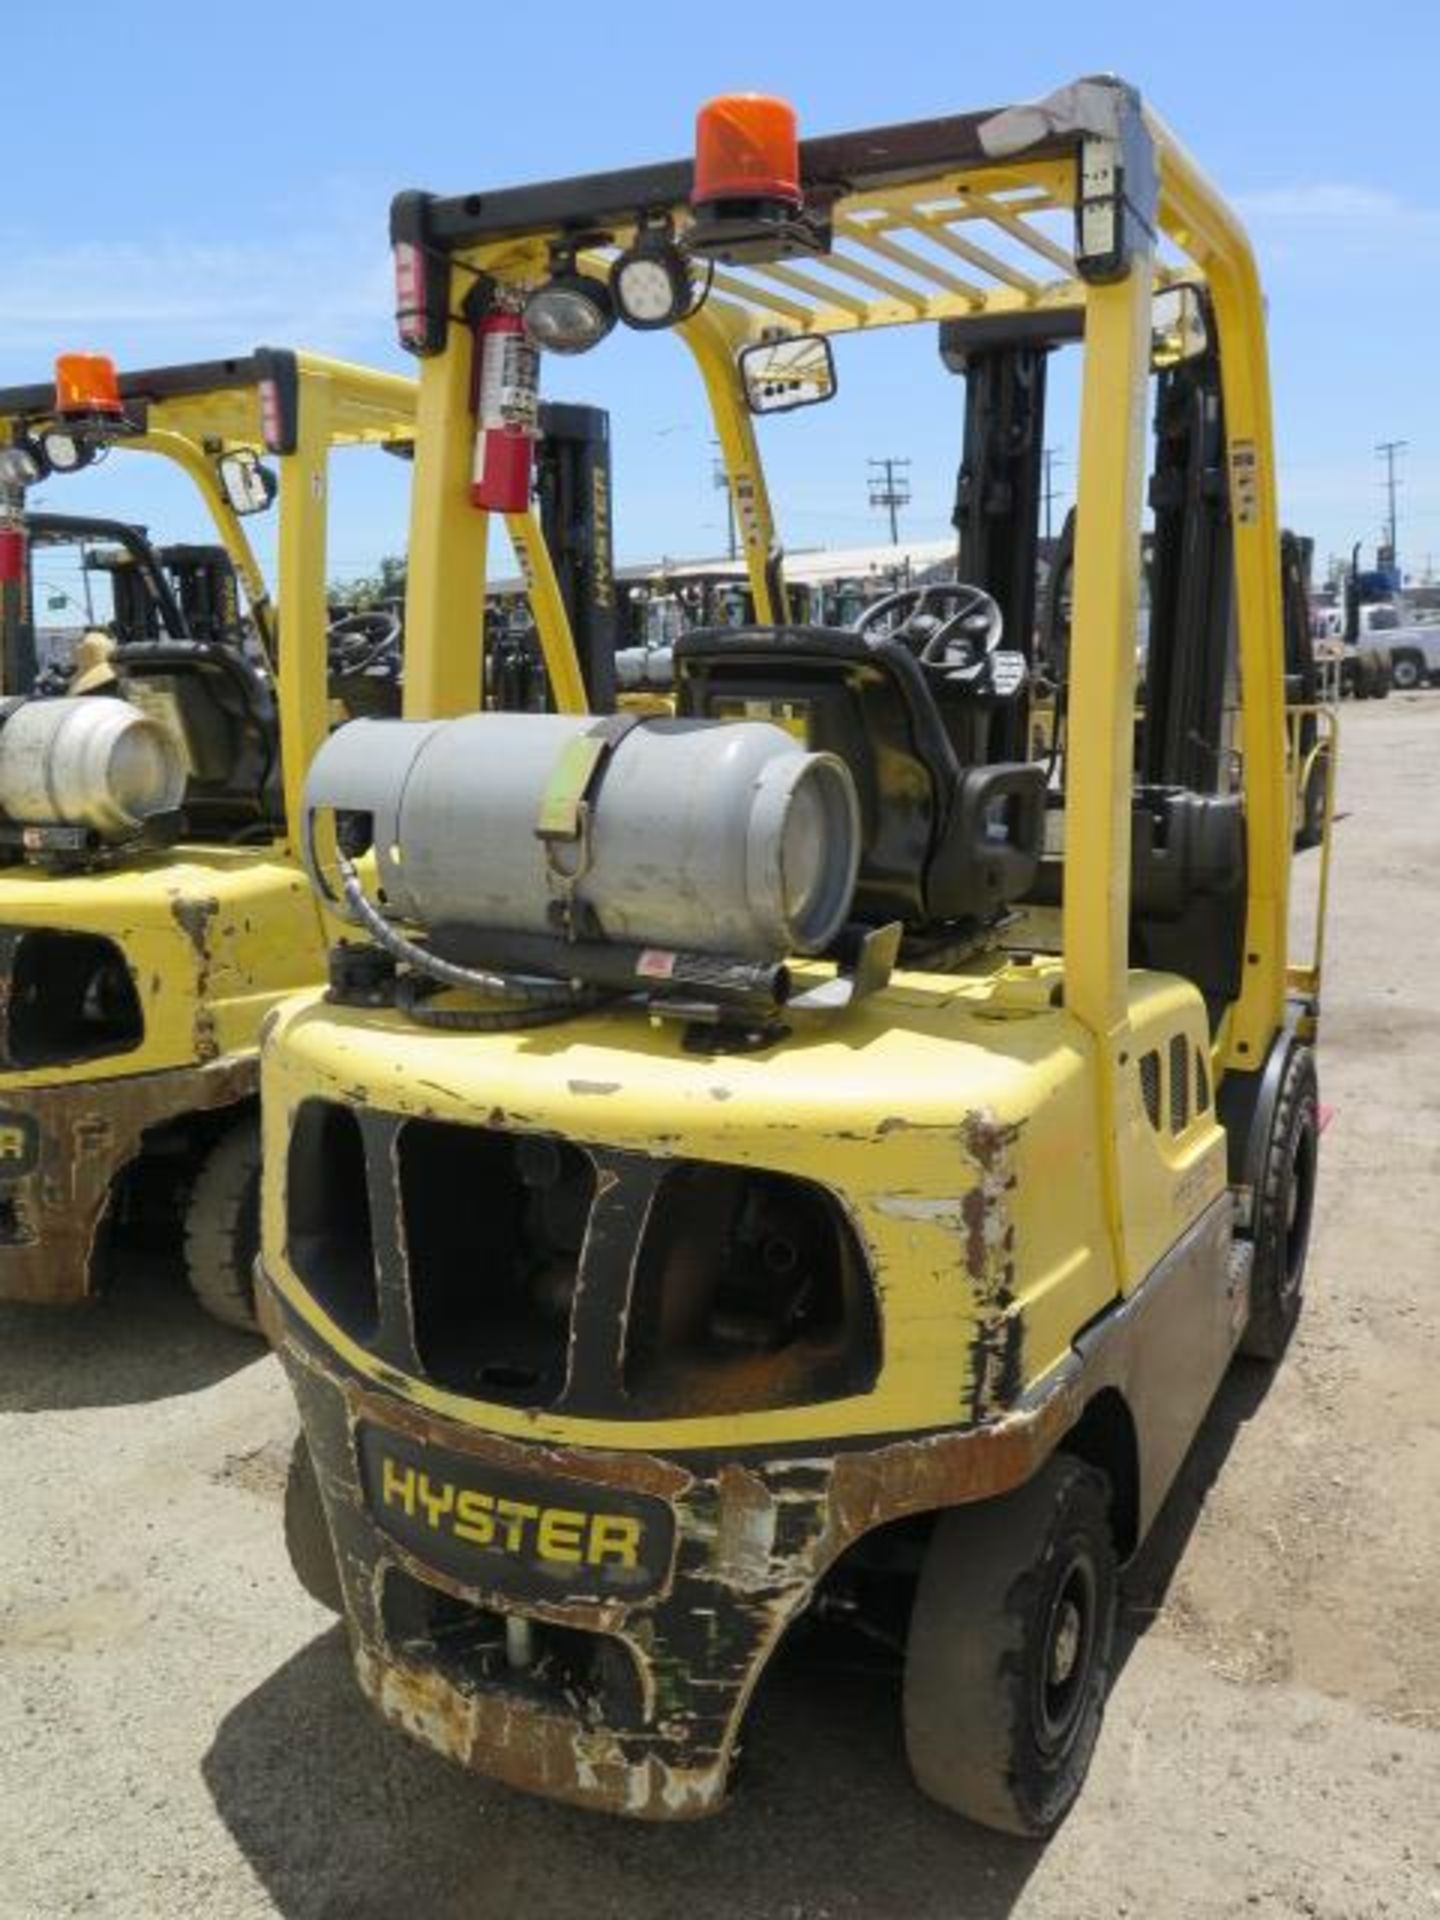 2018 Hyster H60FT 6000 Lb Cap LPG Forklift s/n P177V04957P w/ 3-Stage,182” Lift Height, SOLD AS IS - Image 9 of 22